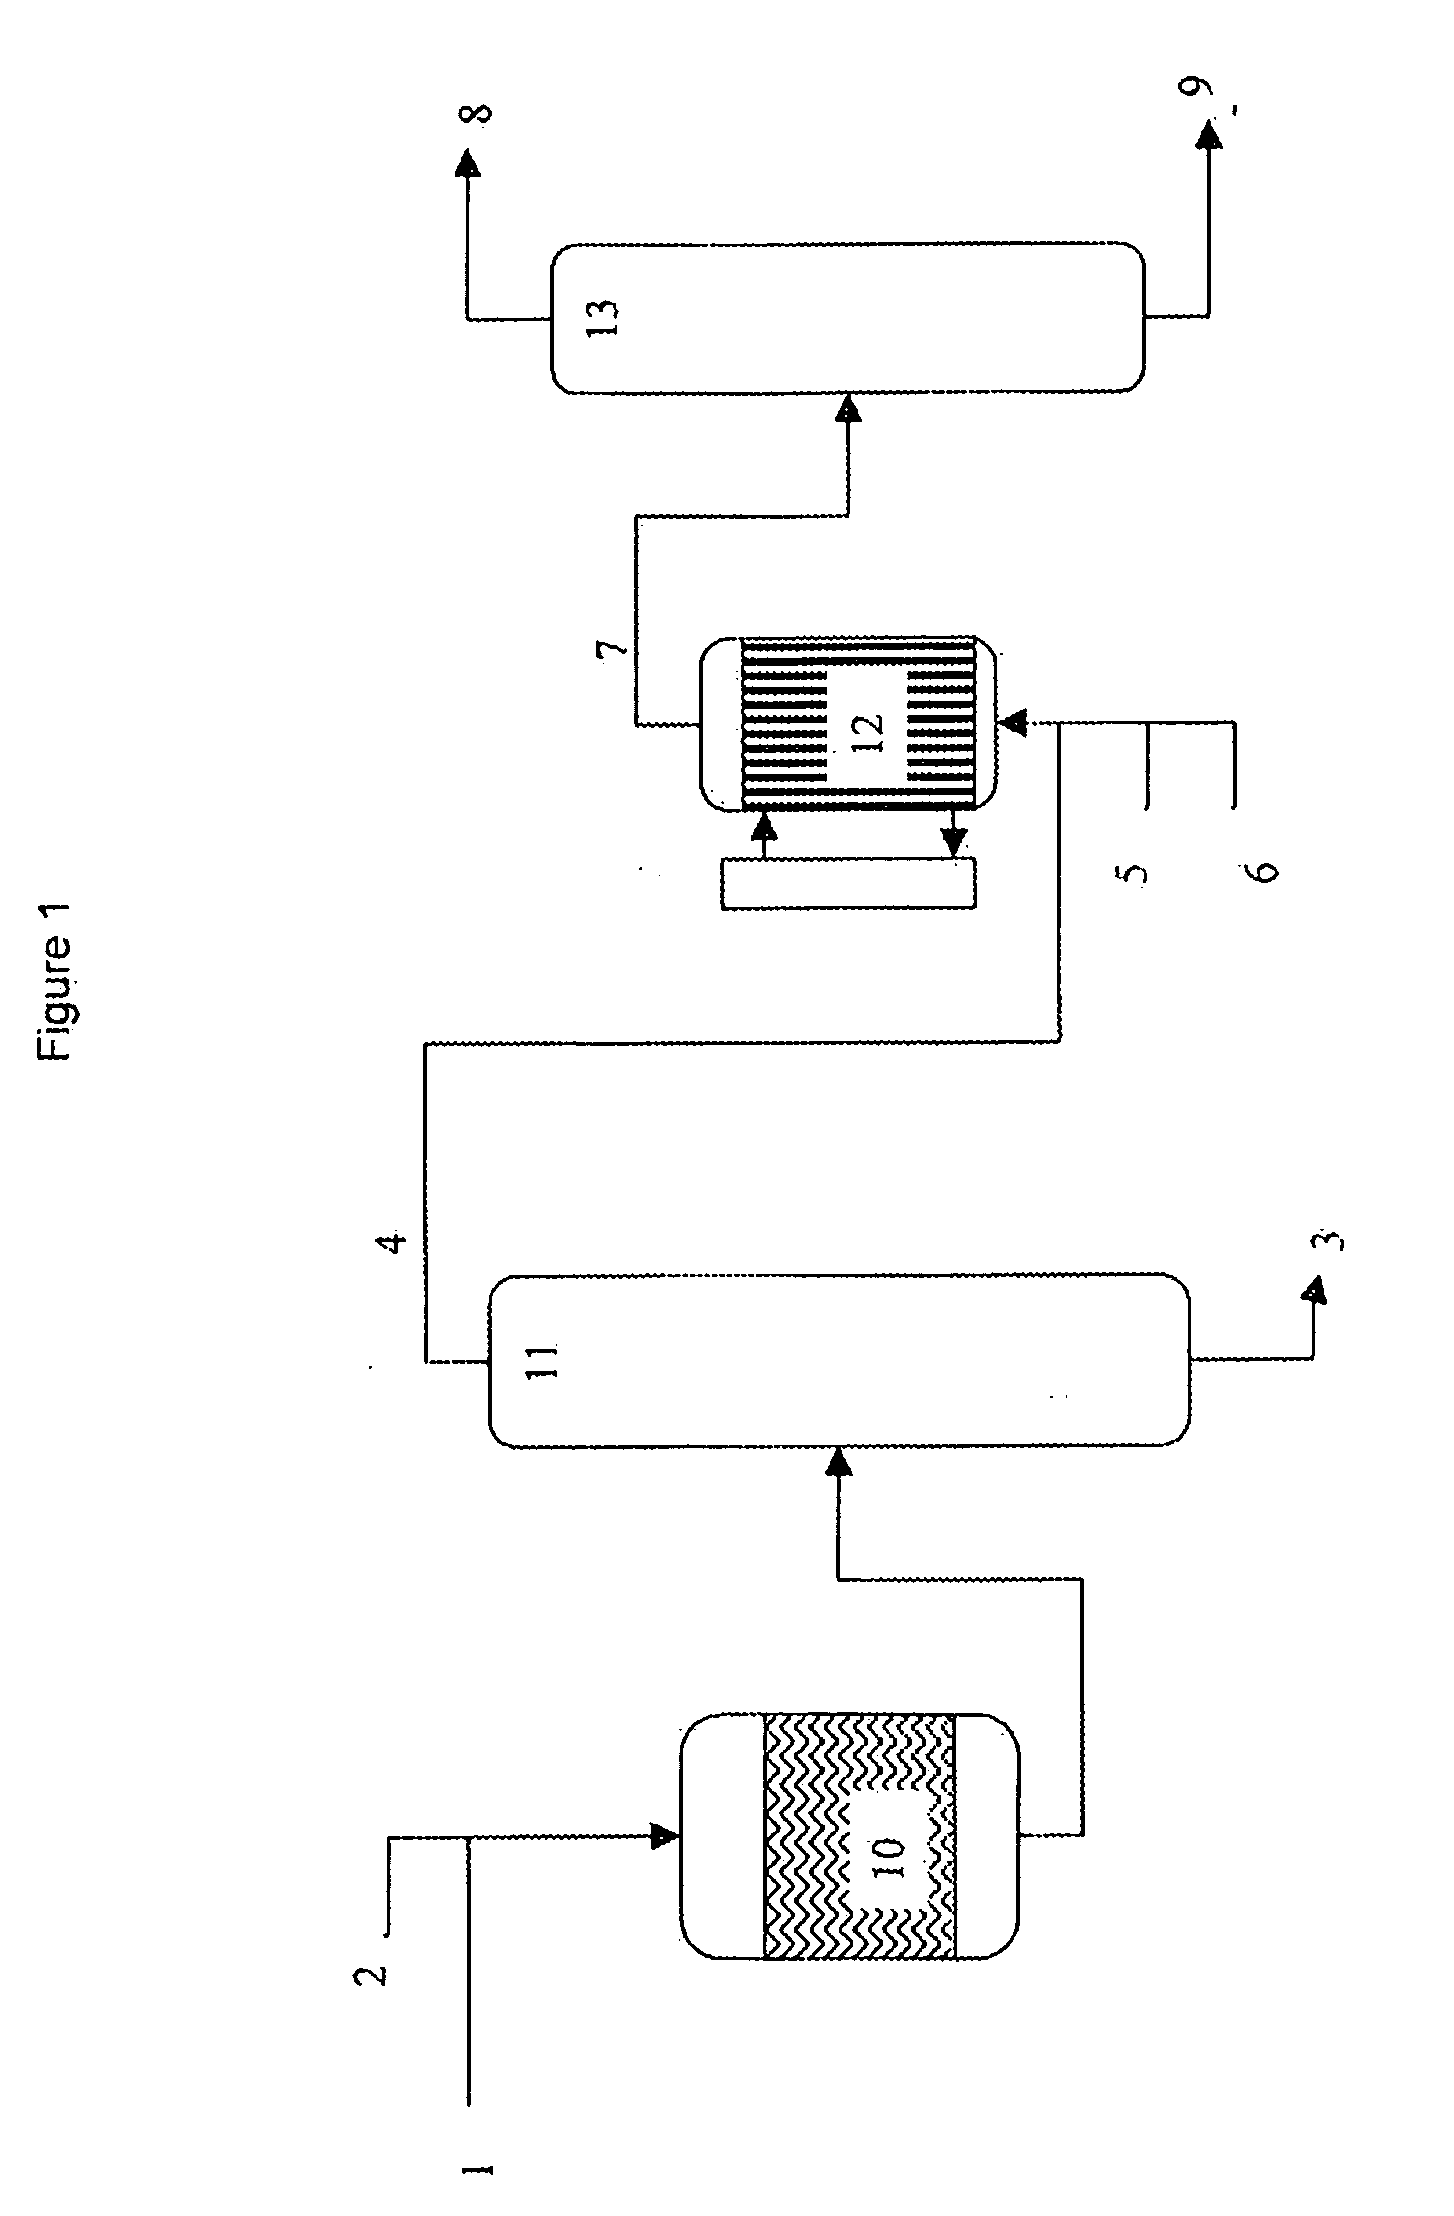 Method for the synthesis of acrylonitrile from glycerol